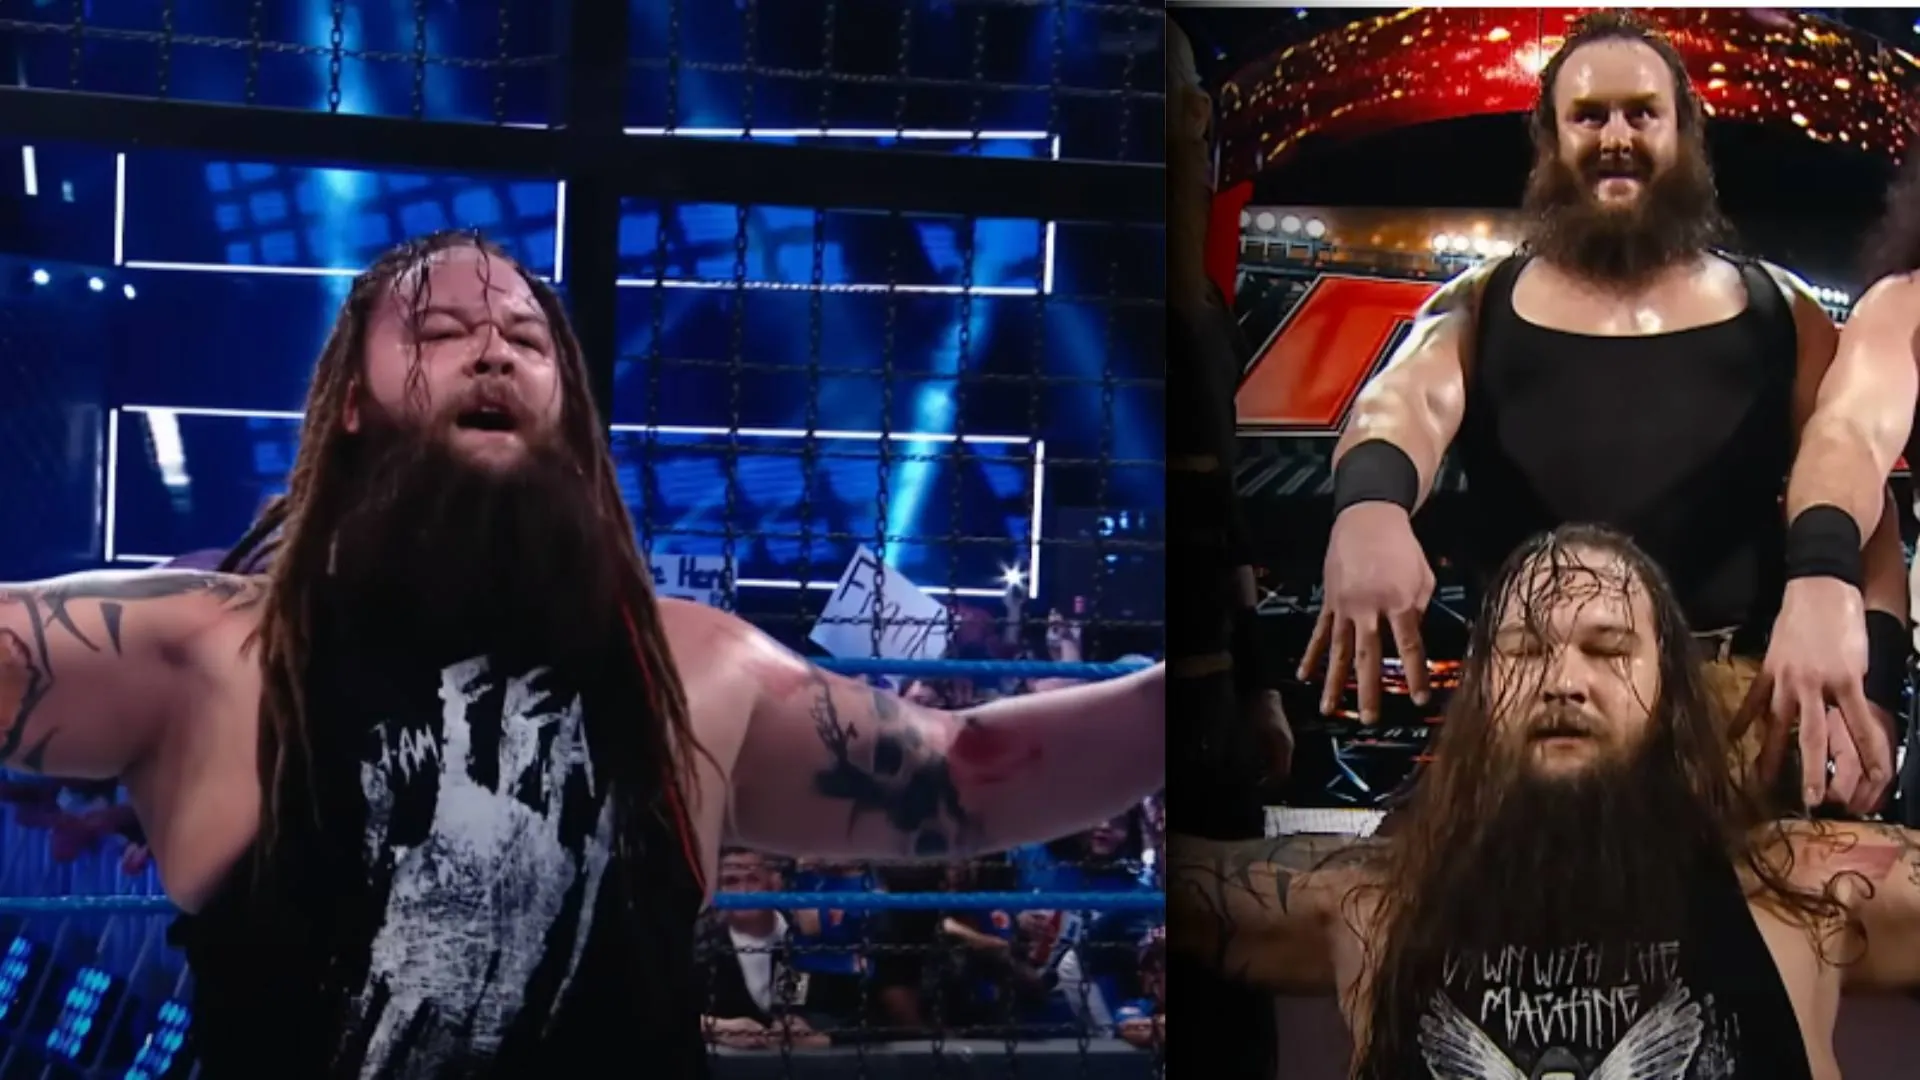 WWE Pays Tribute to Bray Wyatt with Peacock’s Upcoming Documentary